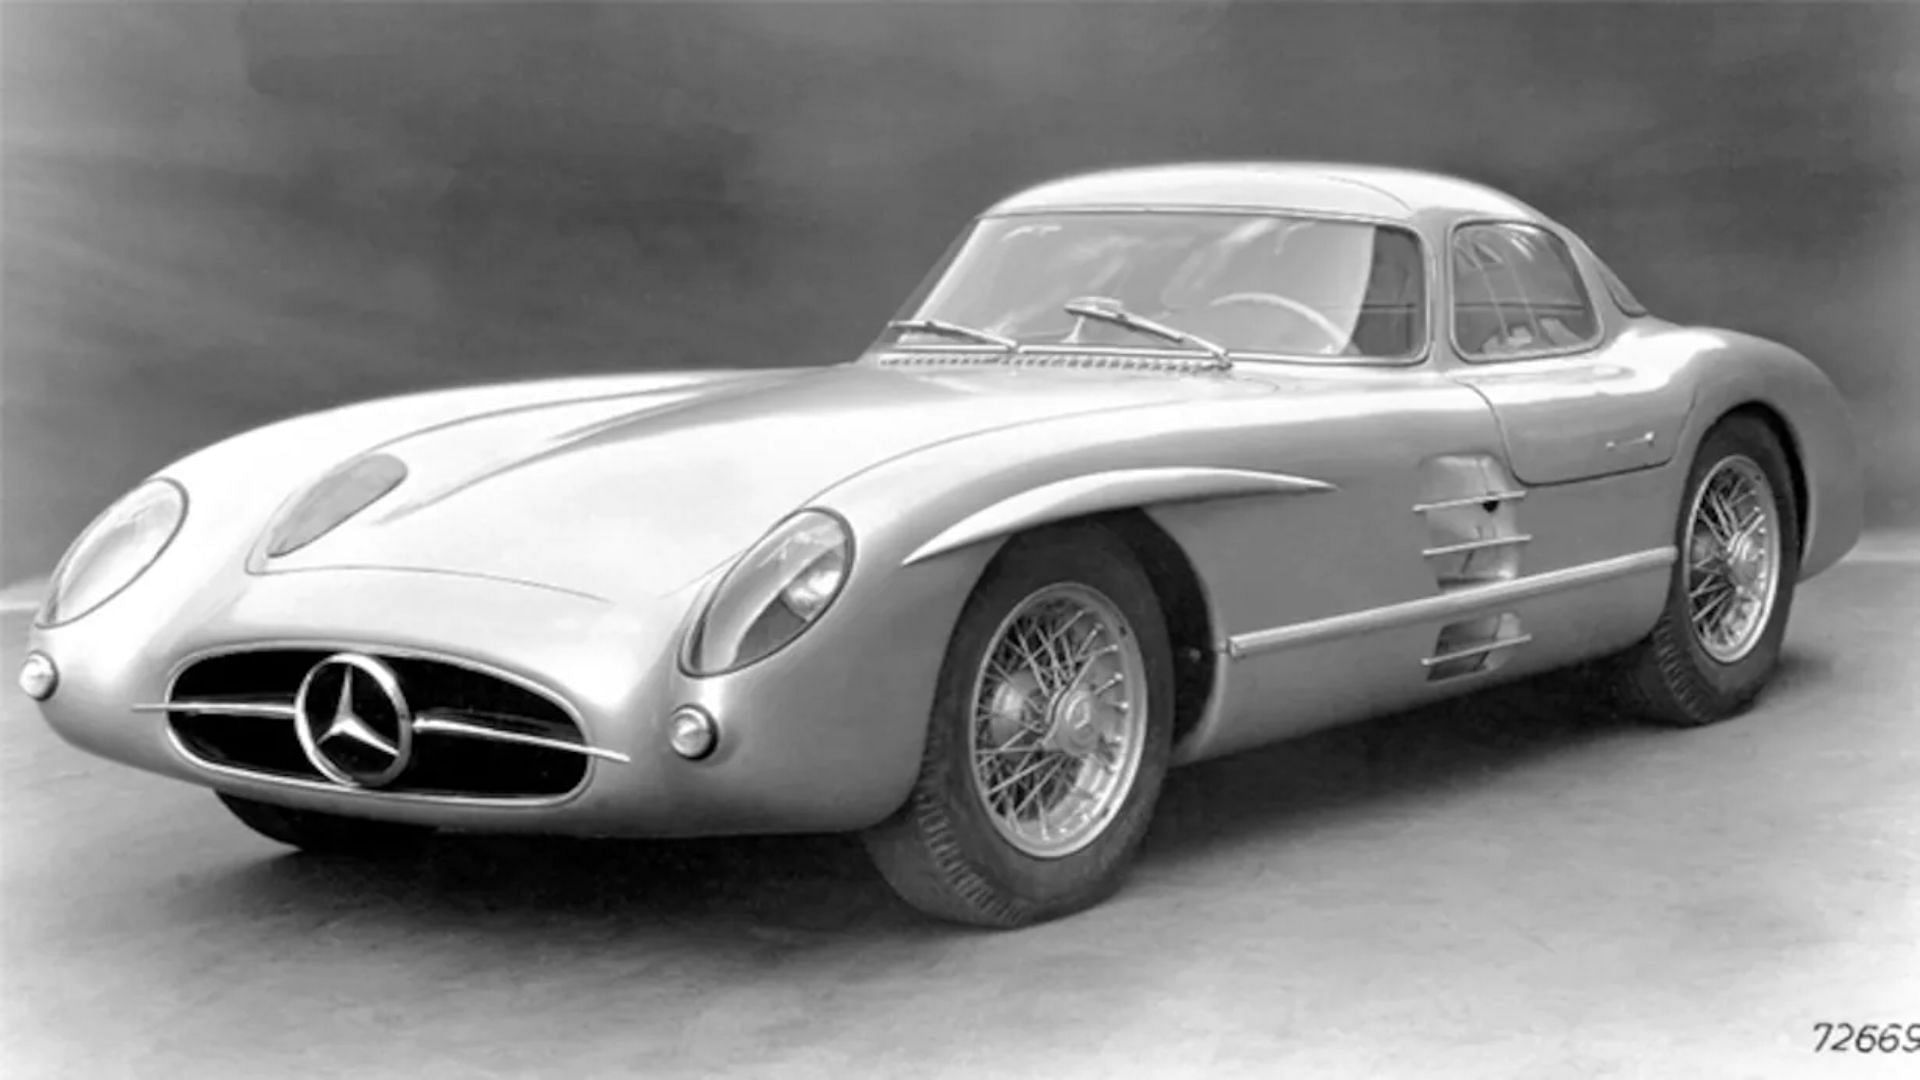 1955 Mercedes-Benz Became the World&rsquo;s Most Expensive Car (Image via Mercedes-Benz AG )